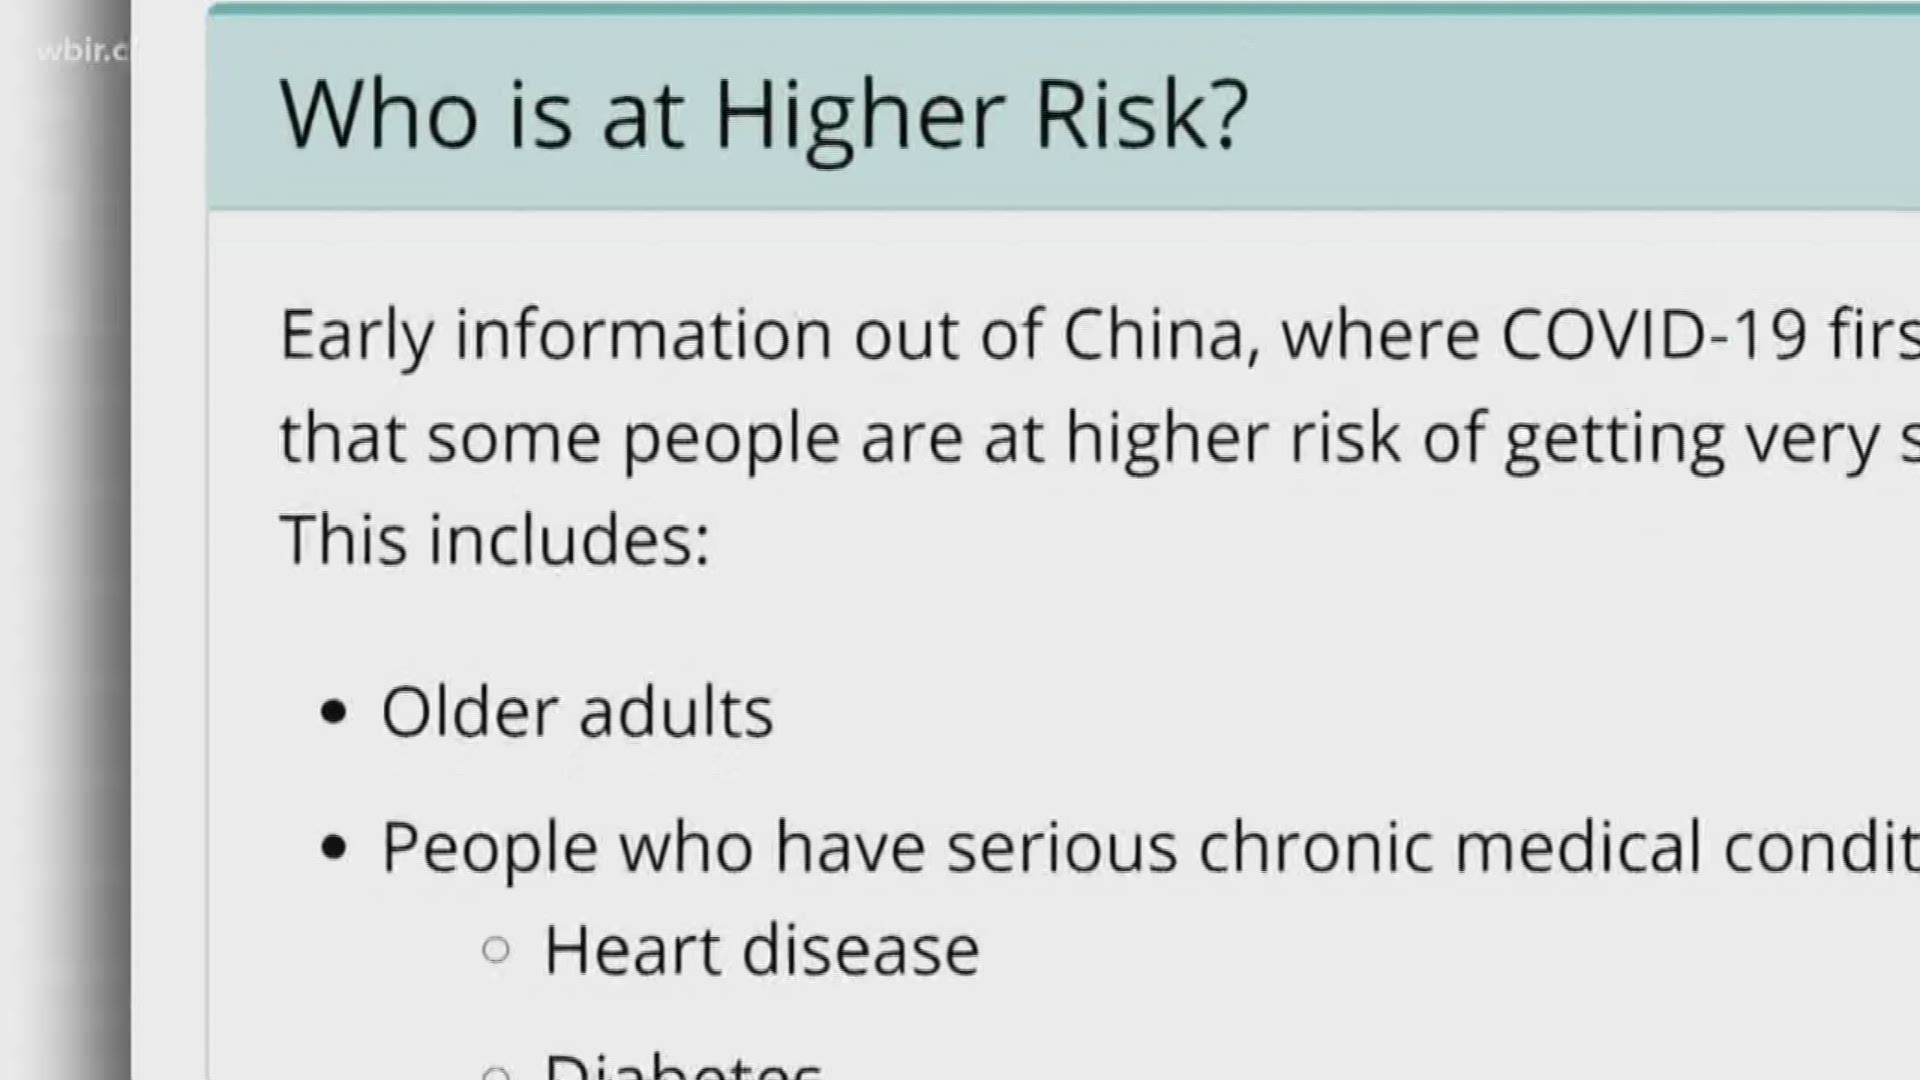 When health leaders talk about the risk of COVID-19, it's not the risk of catching the virus in the first place. They mean the risk of becoming severely ill.